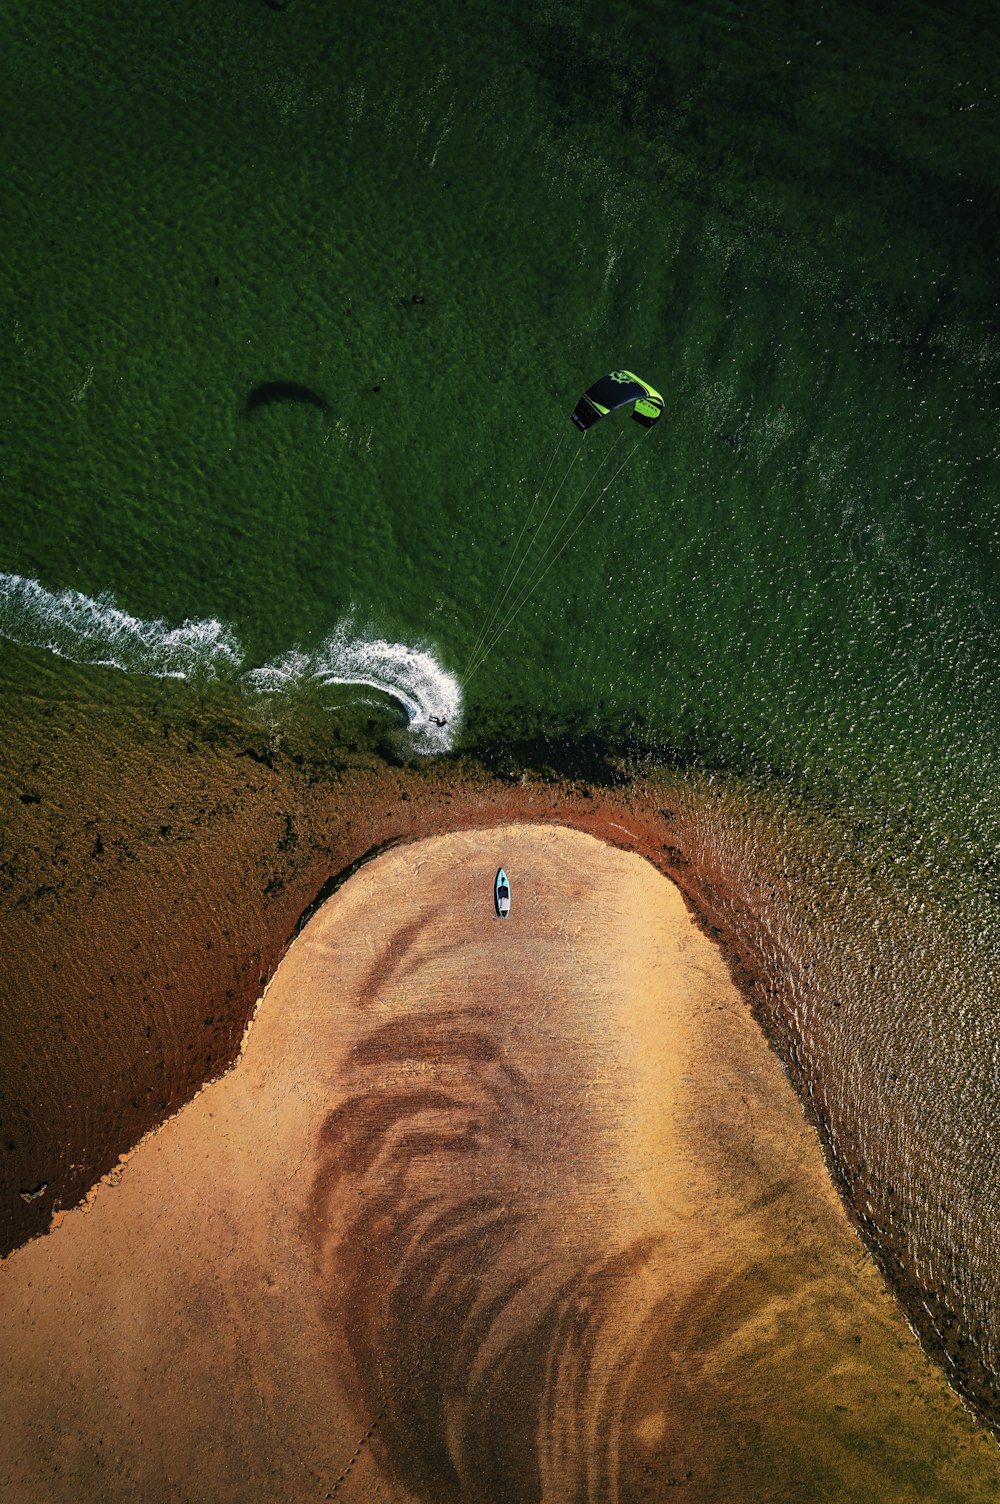 an aerial view of a person parasailing in the ocean